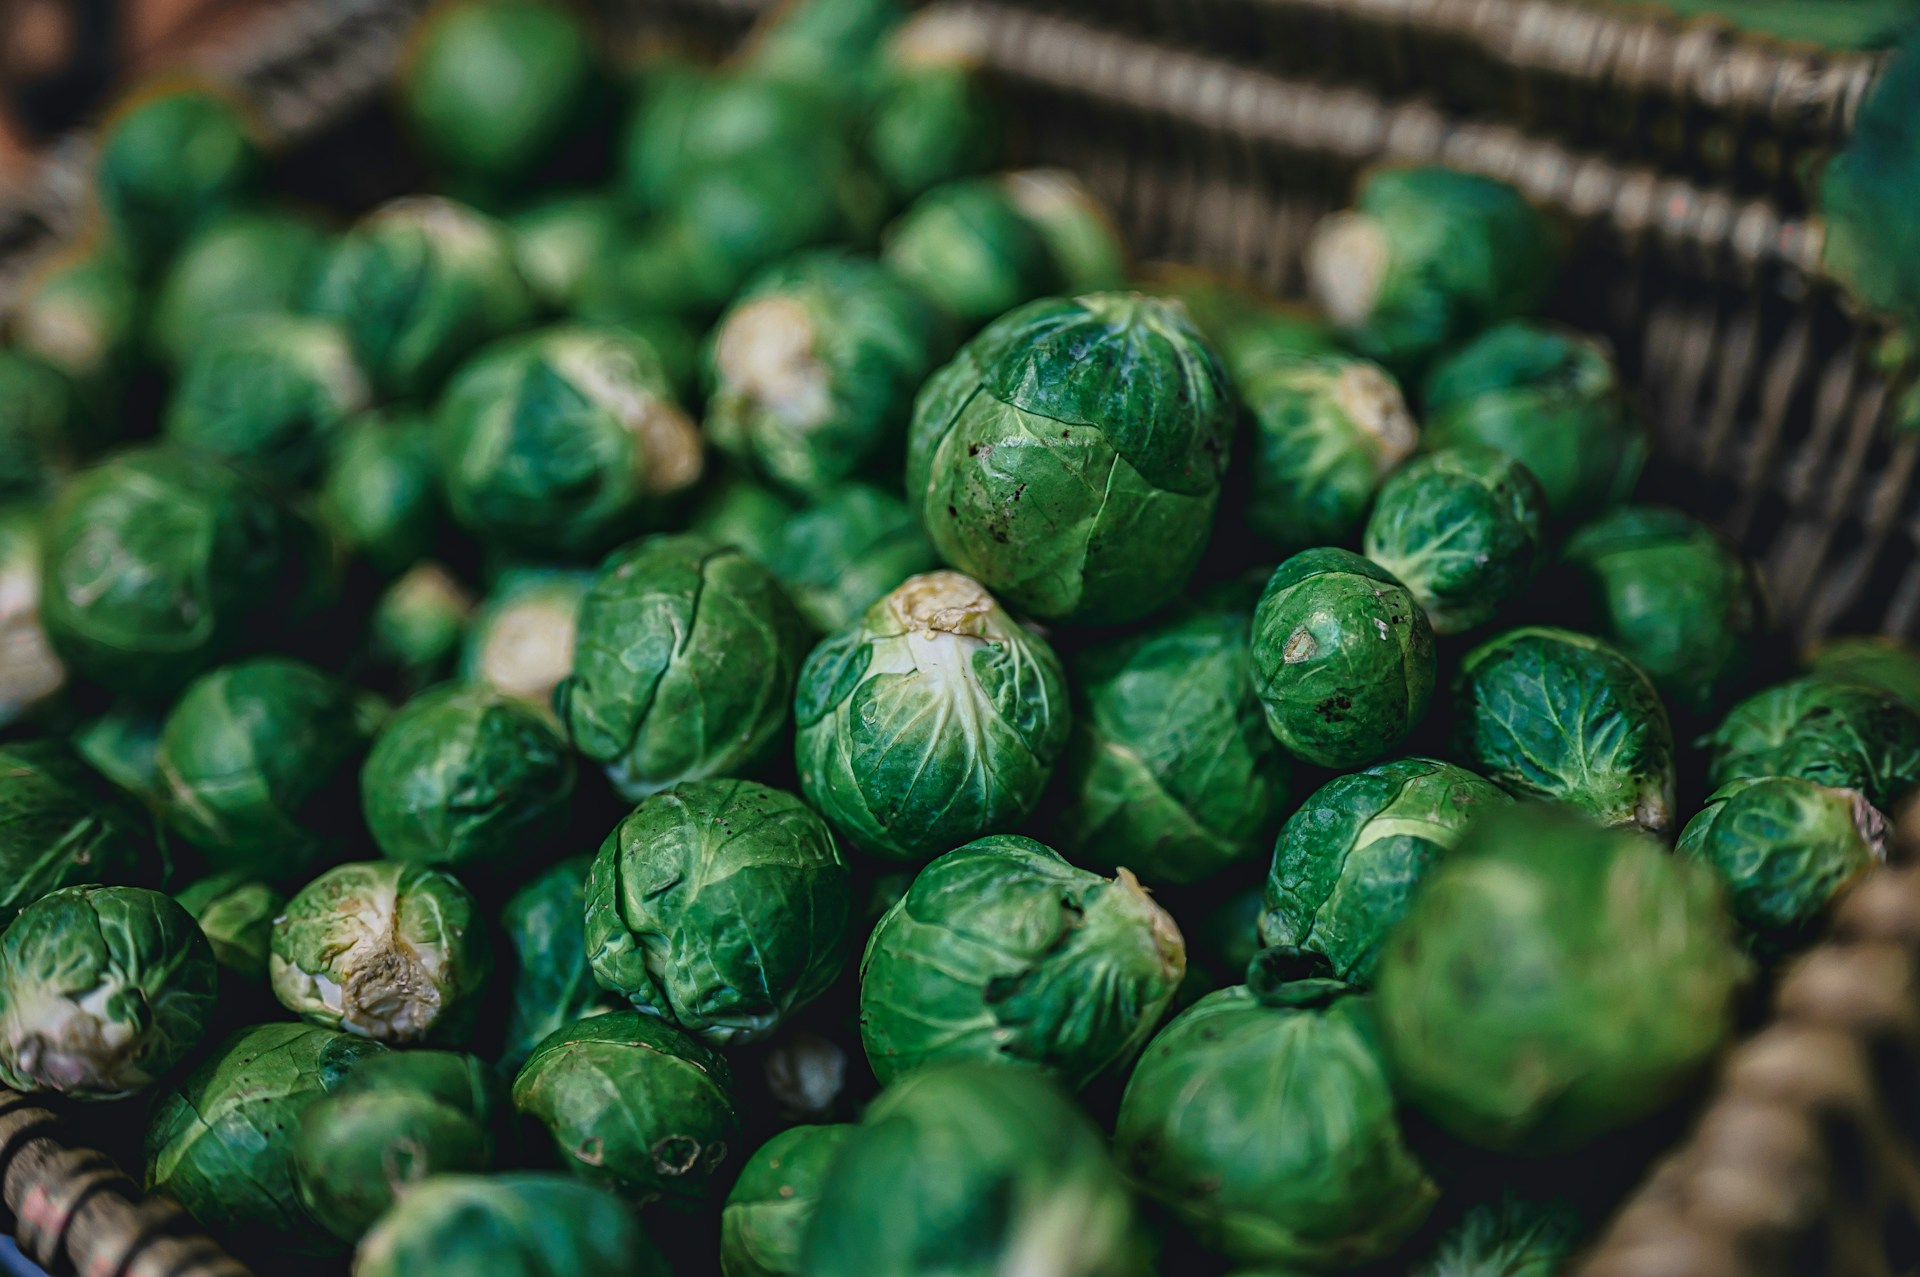 how long do brussel sprouts take to grow